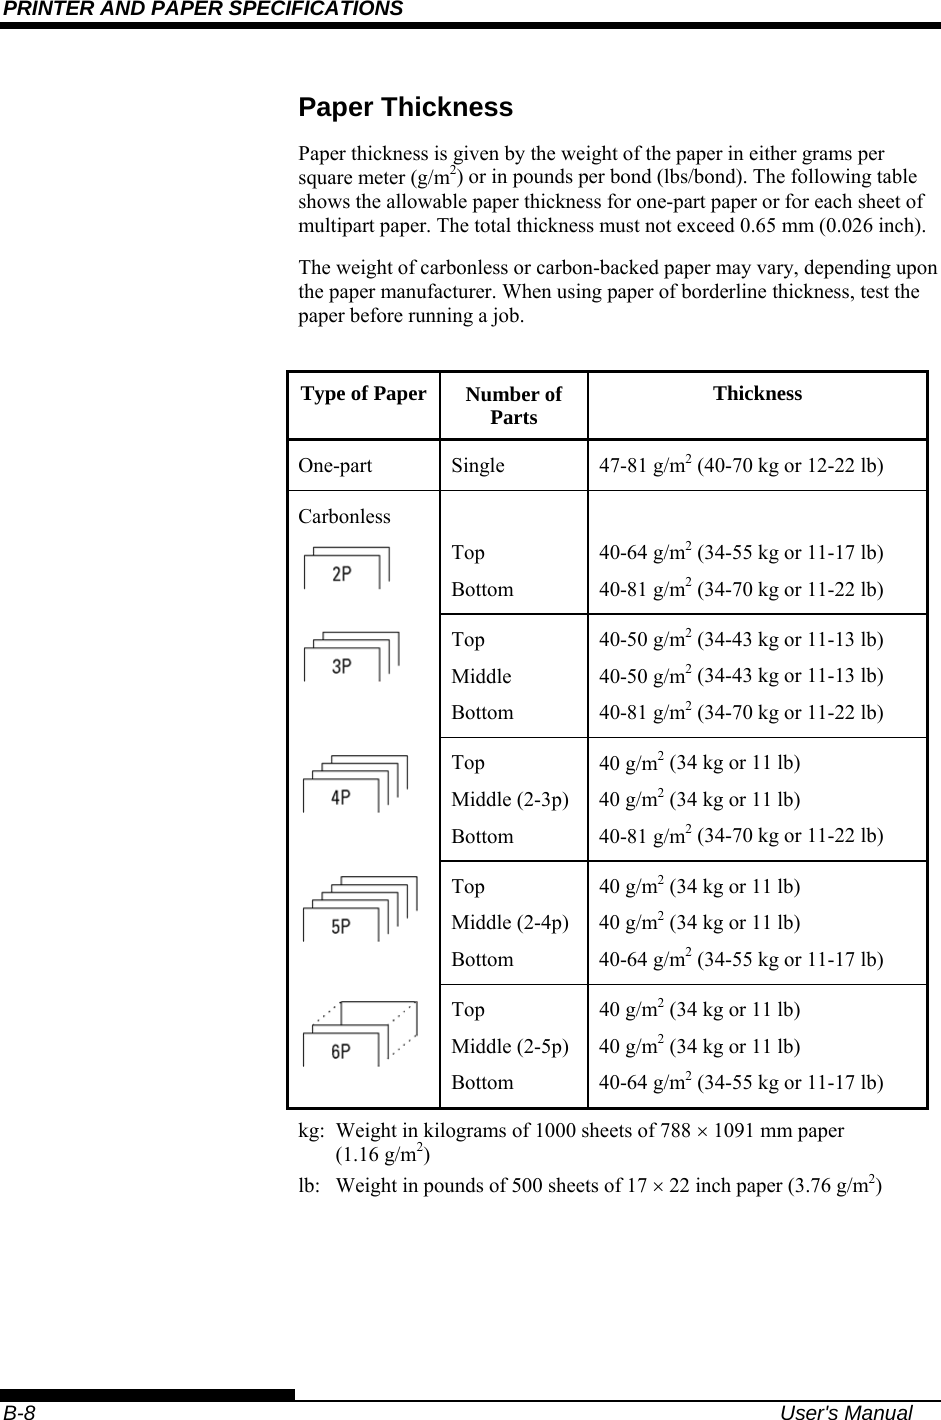 PRINTER AND PAPER SPECIFICATIONS    B-8  User&apos;s Manual Paper Thickness Paper thickness is given by the weight of the paper in either grams per square meter (g/m2) or in pounds per bond (lbs/bond). The following table shows the allowable paper thickness for one-part paper or for each sheet of multipart paper. The total thickness must not exceed 0.65 mm (0.026 inch). The weight of carbonless or carbon-backed paper may vary, depending upon the paper manufacturer. When using paper of borderline thickness, test the paper before running a job.  Type of Paper Number of Parts  Thickness One-part Single  47-81 g/m2 (40-70 kg or 12-22 lb) Carbonless   Top Bottom  40-64 g/m2 (34-55 kg or 11-17 lb) 40-81 g/m2 (34-70 kg or 11-22 lb) Top Middle Bottom 40-50 g/m2 (34-43 kg or 11-13 lb) 40-50 g/m2 (34-43 kg or 11-13 lb) 40-81 g/m2 (34-70 kg or 11-22 lb) Top Middle (2-3p)Bottom 40 g/m2 (34 kg or 11 lb) 40 g/m2 (34 kg or 11 lb) 40-81 g/m2 (34-70 kg or 11-22 lb) Top Middle (2-4p)Bottom 40 g/m2 (34 kg or 11 lb) 40 g/m2 (34 kg or 11 lb) 40-64 g/m2 (34-55 kg or 11-17 lb) Top Middle (2-5p)Bottom 40 g/m2 (34 kg or 11 lb) 40 g/m2 (34 kg or 11 lb) 40-64 g/m2 (34-55 kg or 11-17 lb) kg:  Weight in kilograms of 1000 sheets of 788 × 1091 mm paper (1.16 g/m2) lb:  Weight in pounds of 500 sheets of 17 × 22 inch paper (3.76 g/m2) 